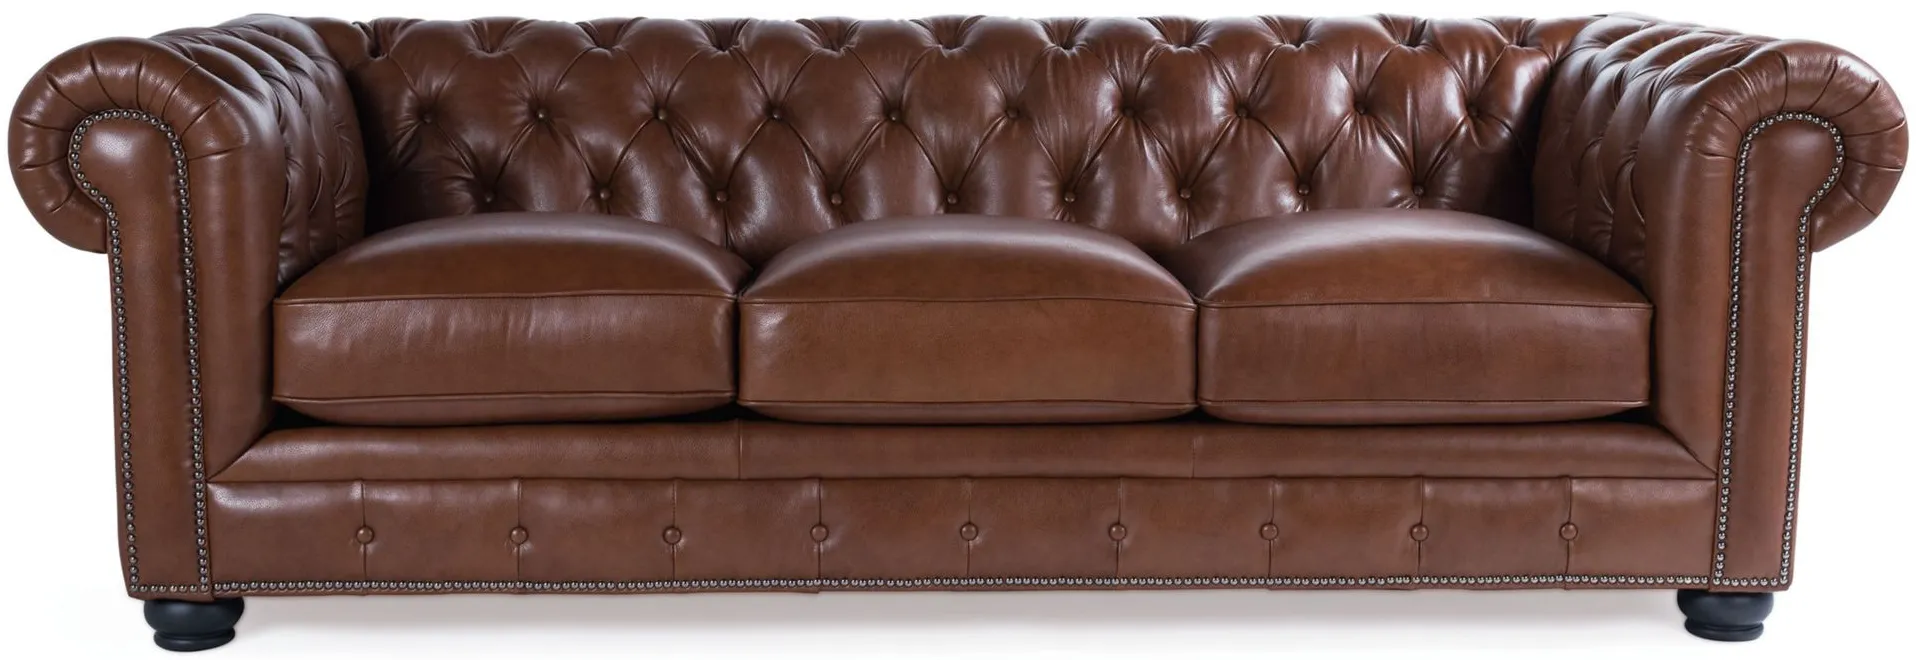 Jay Sofa in Cobble Stone by Bellanest